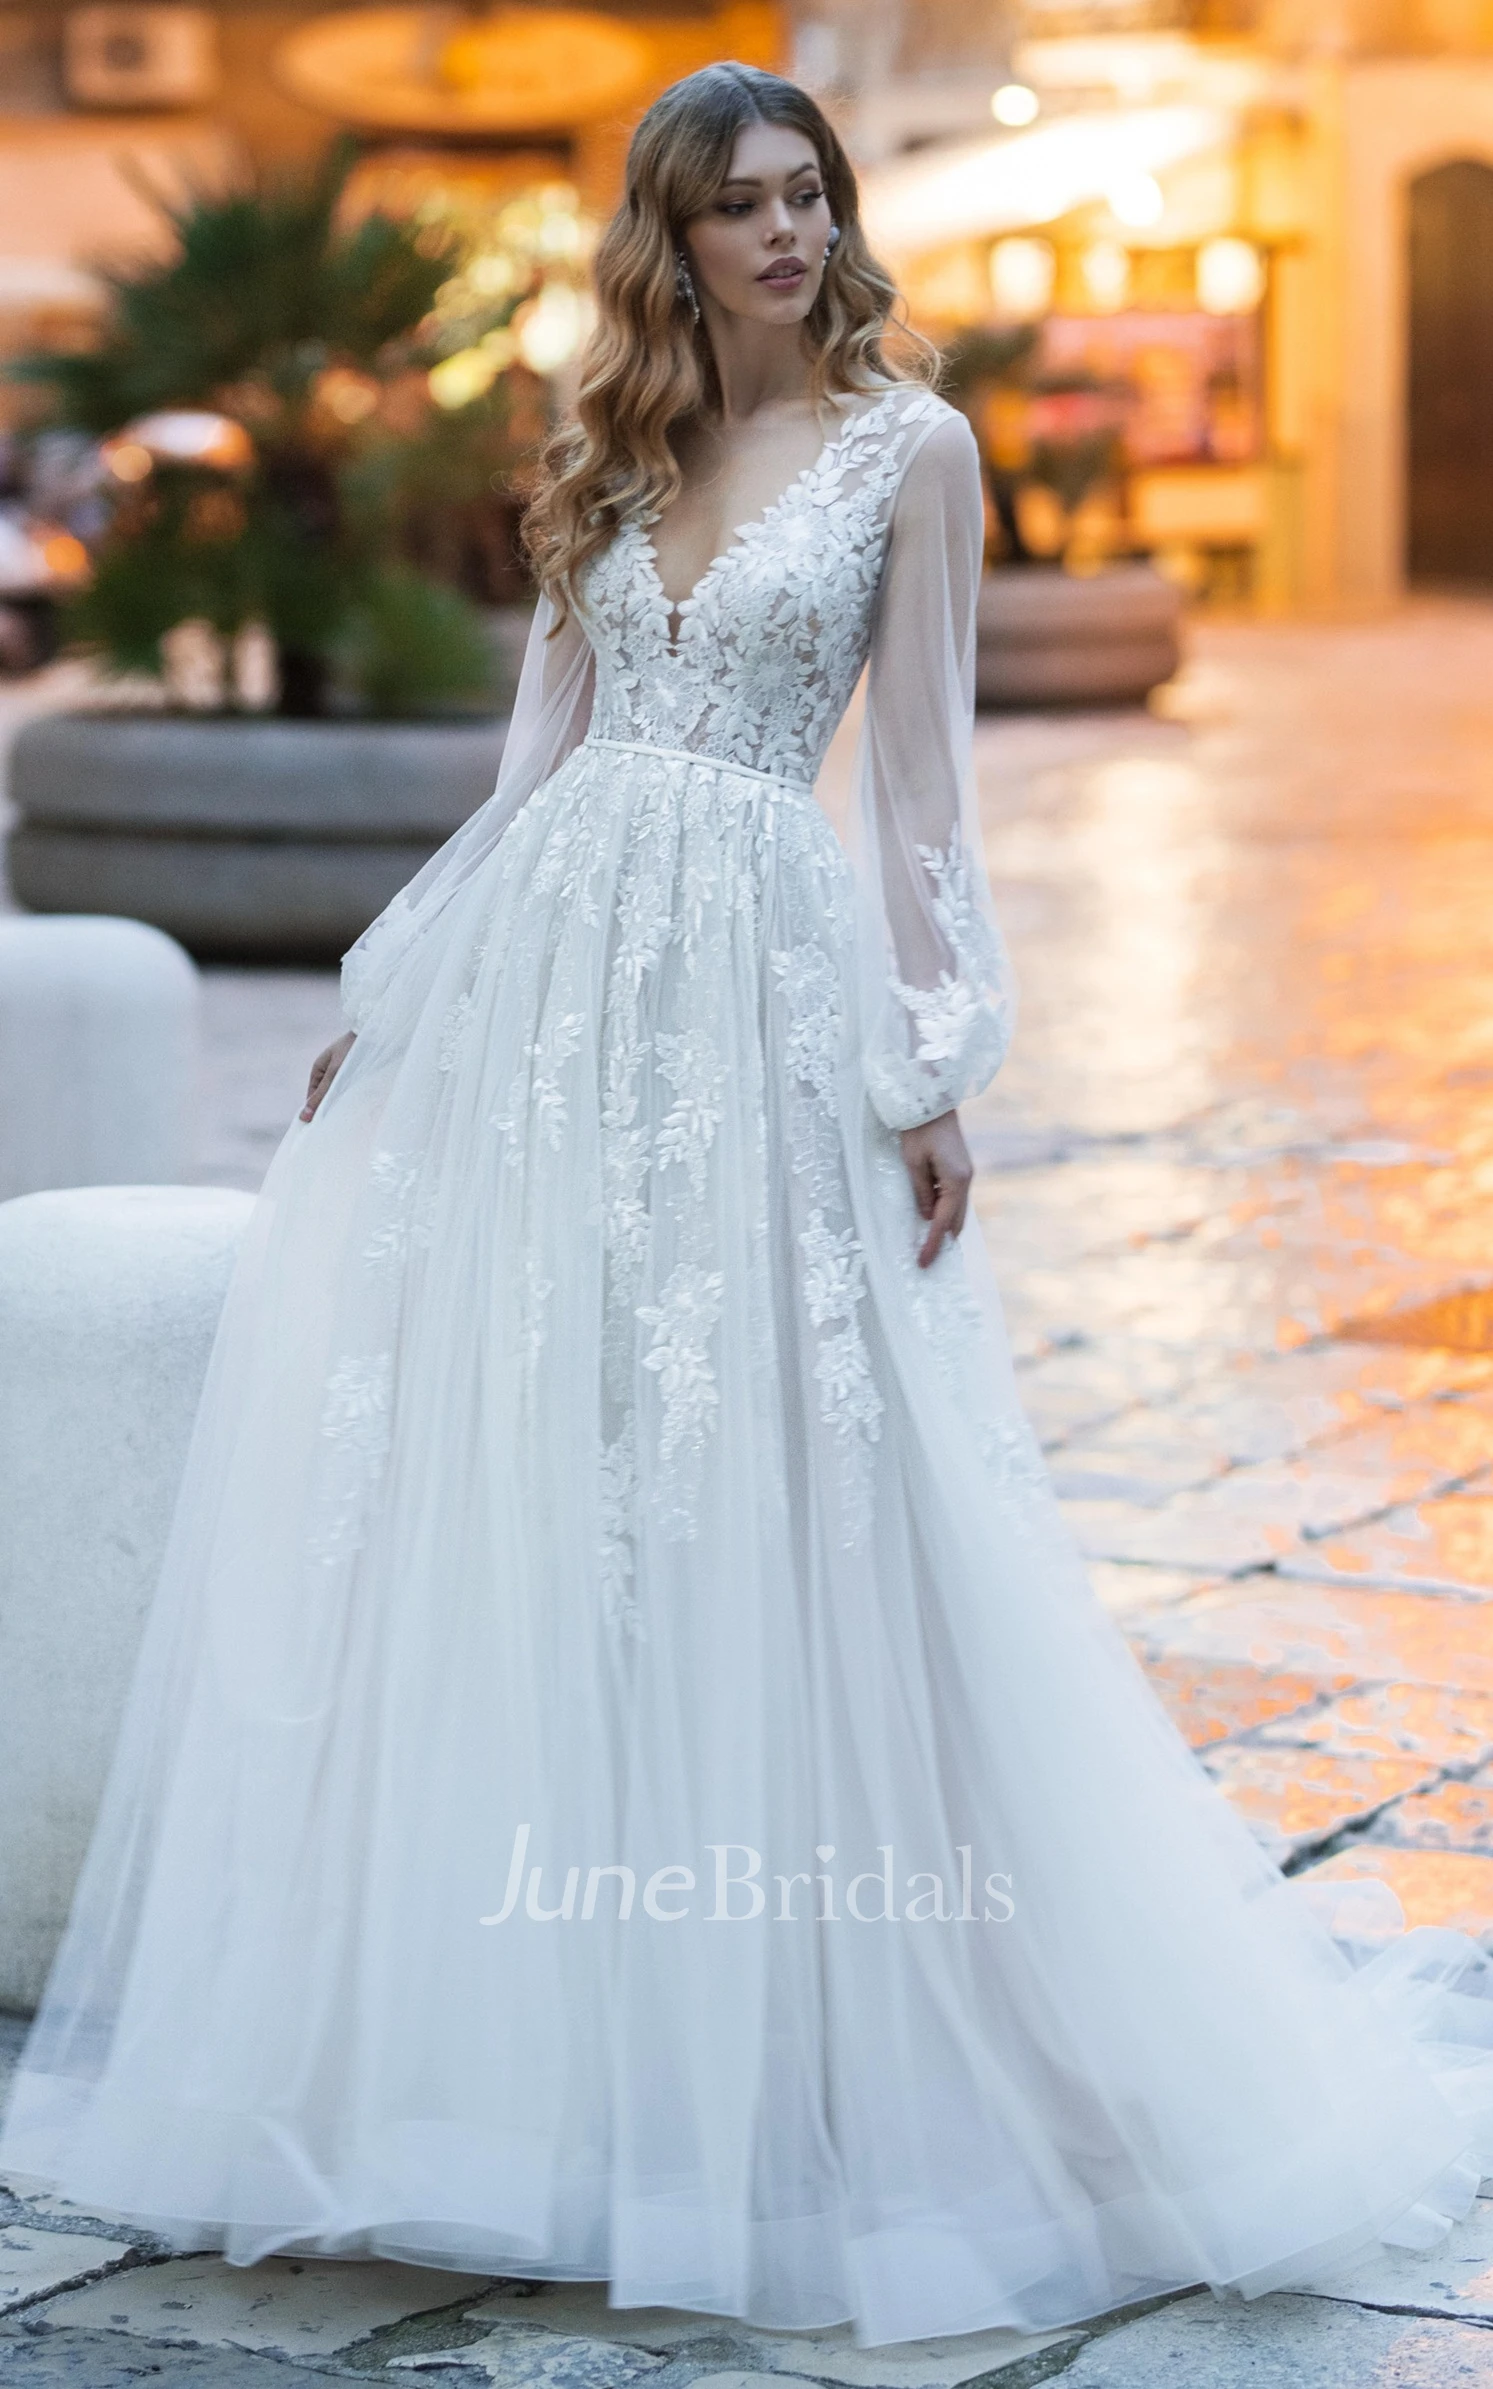 Women's Ball-gown Long Sleeves V-neck Floral Lace Wedding Gown, Court Train Bridal  Wedding Dresses 